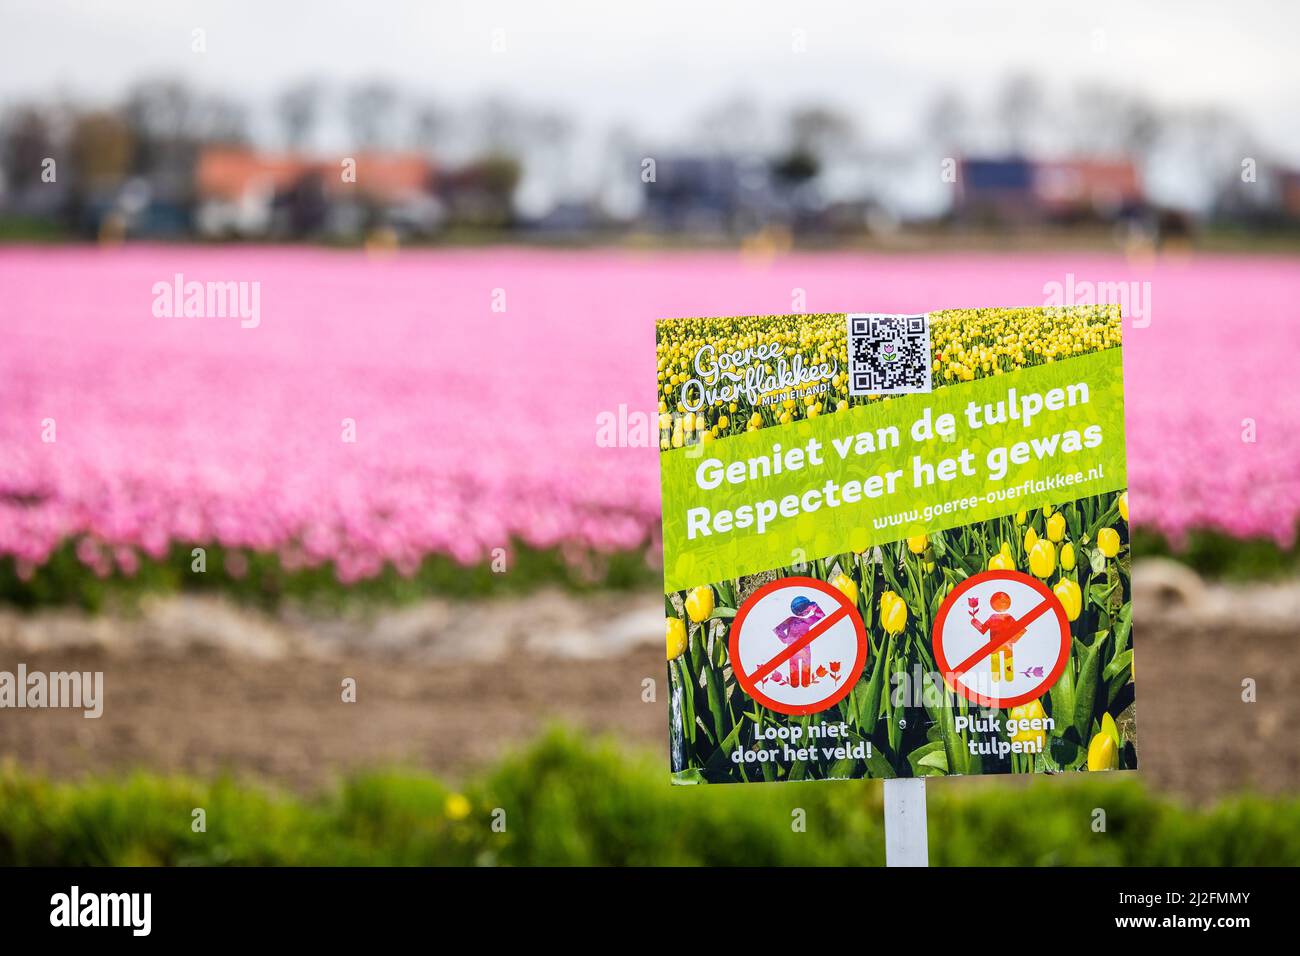 2022-03-31 08:06:45 31-03-2022, Zuid-Beijerland - Tulip fields in bloom on a field in Zuid-Beijerland. The tulips bloom early this year due to the beautiful sunny weather. Photo: ANP / Hollandse Hoogte / Jeffrey Groeneweg netherlands out - belgium out Stock Photo